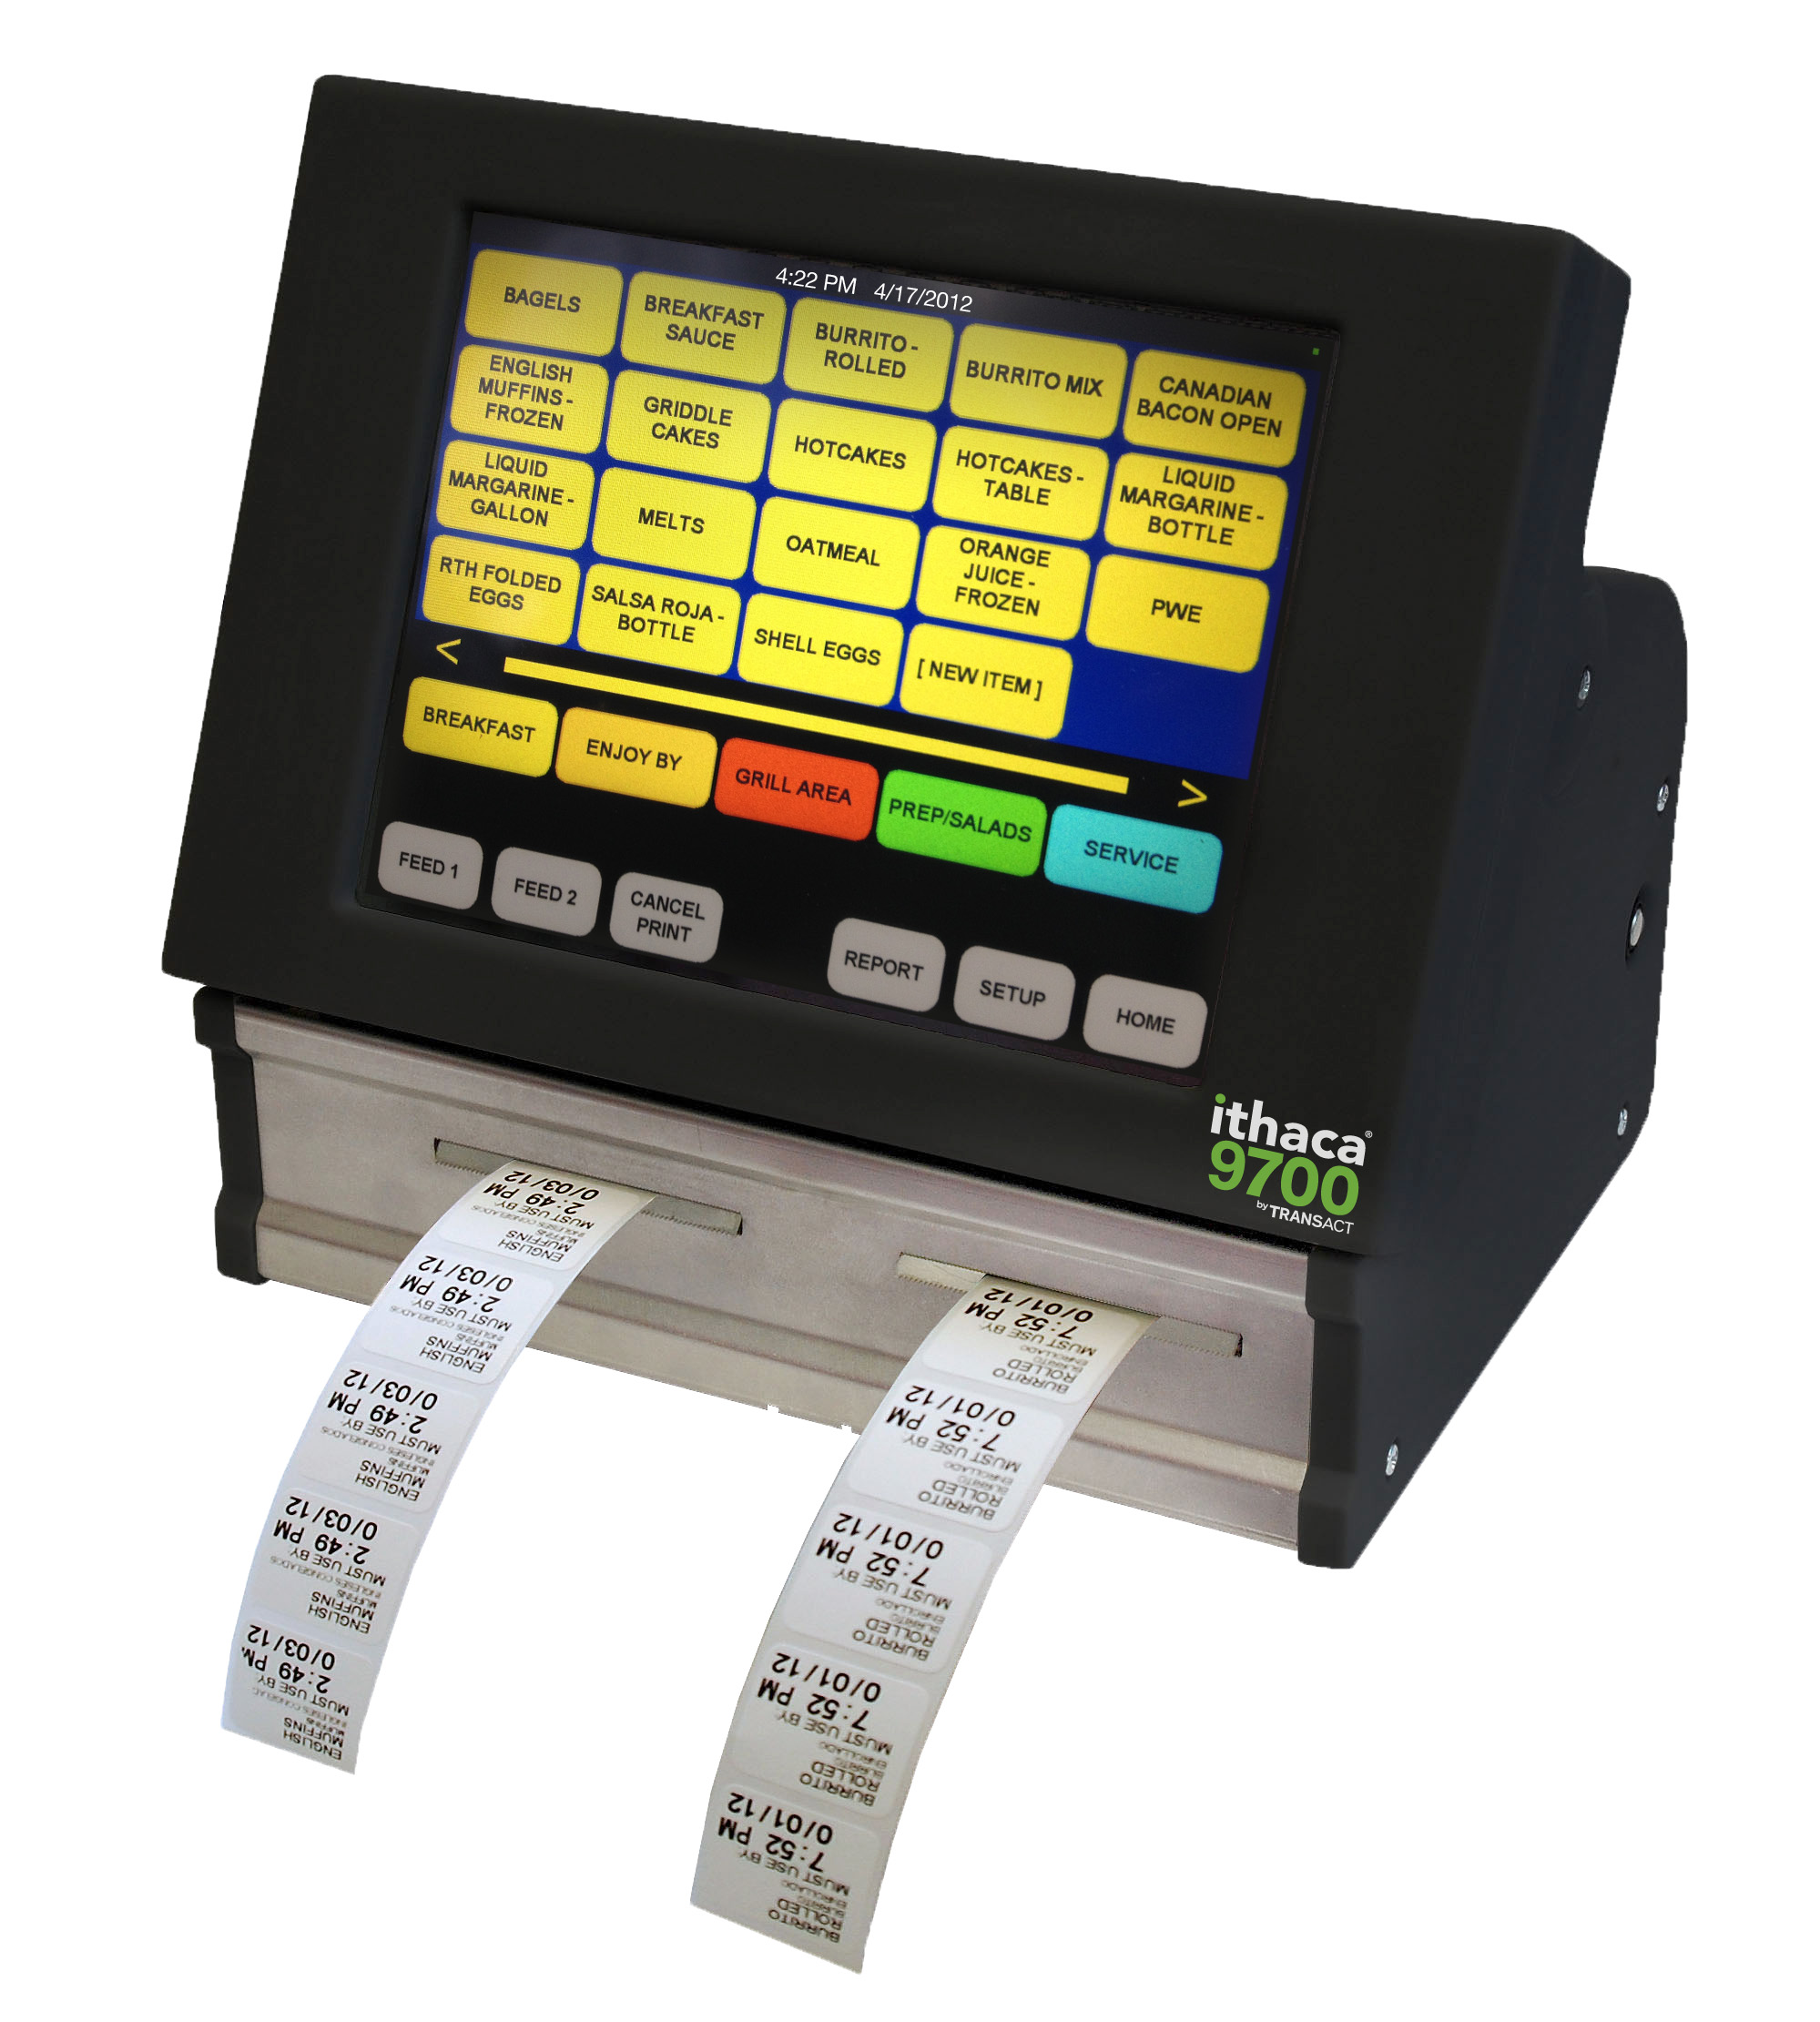 Ithaca 9700 Food Safety Terminal